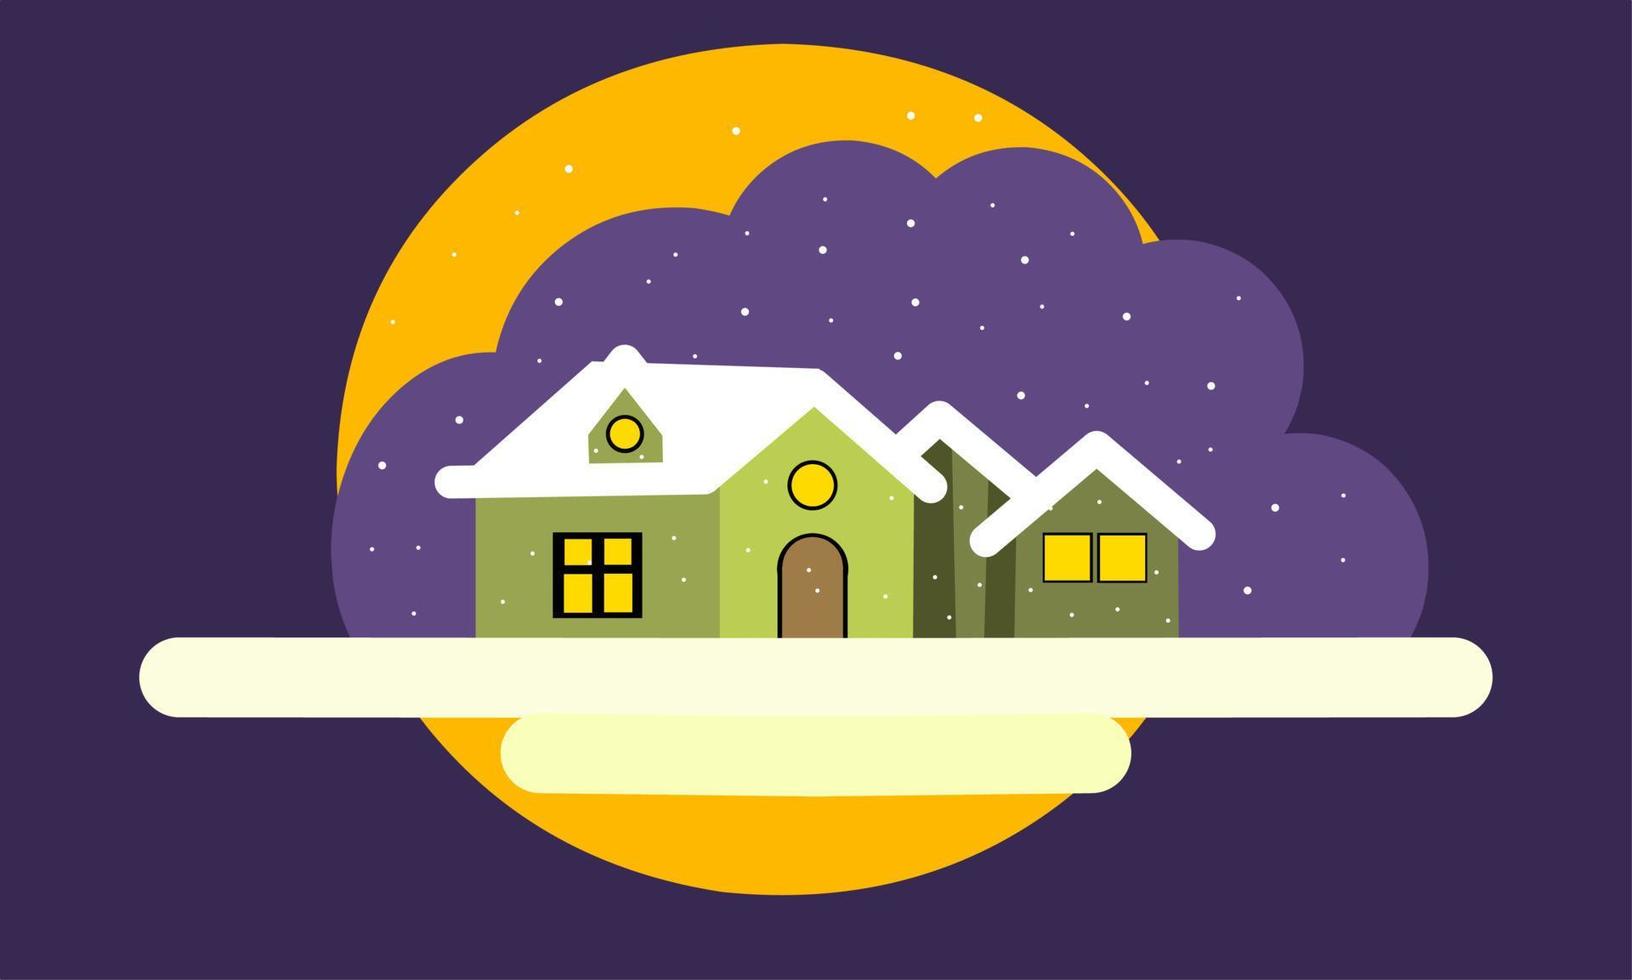 Winter illustration design, view of the house in winter, winter landscape illustration vector